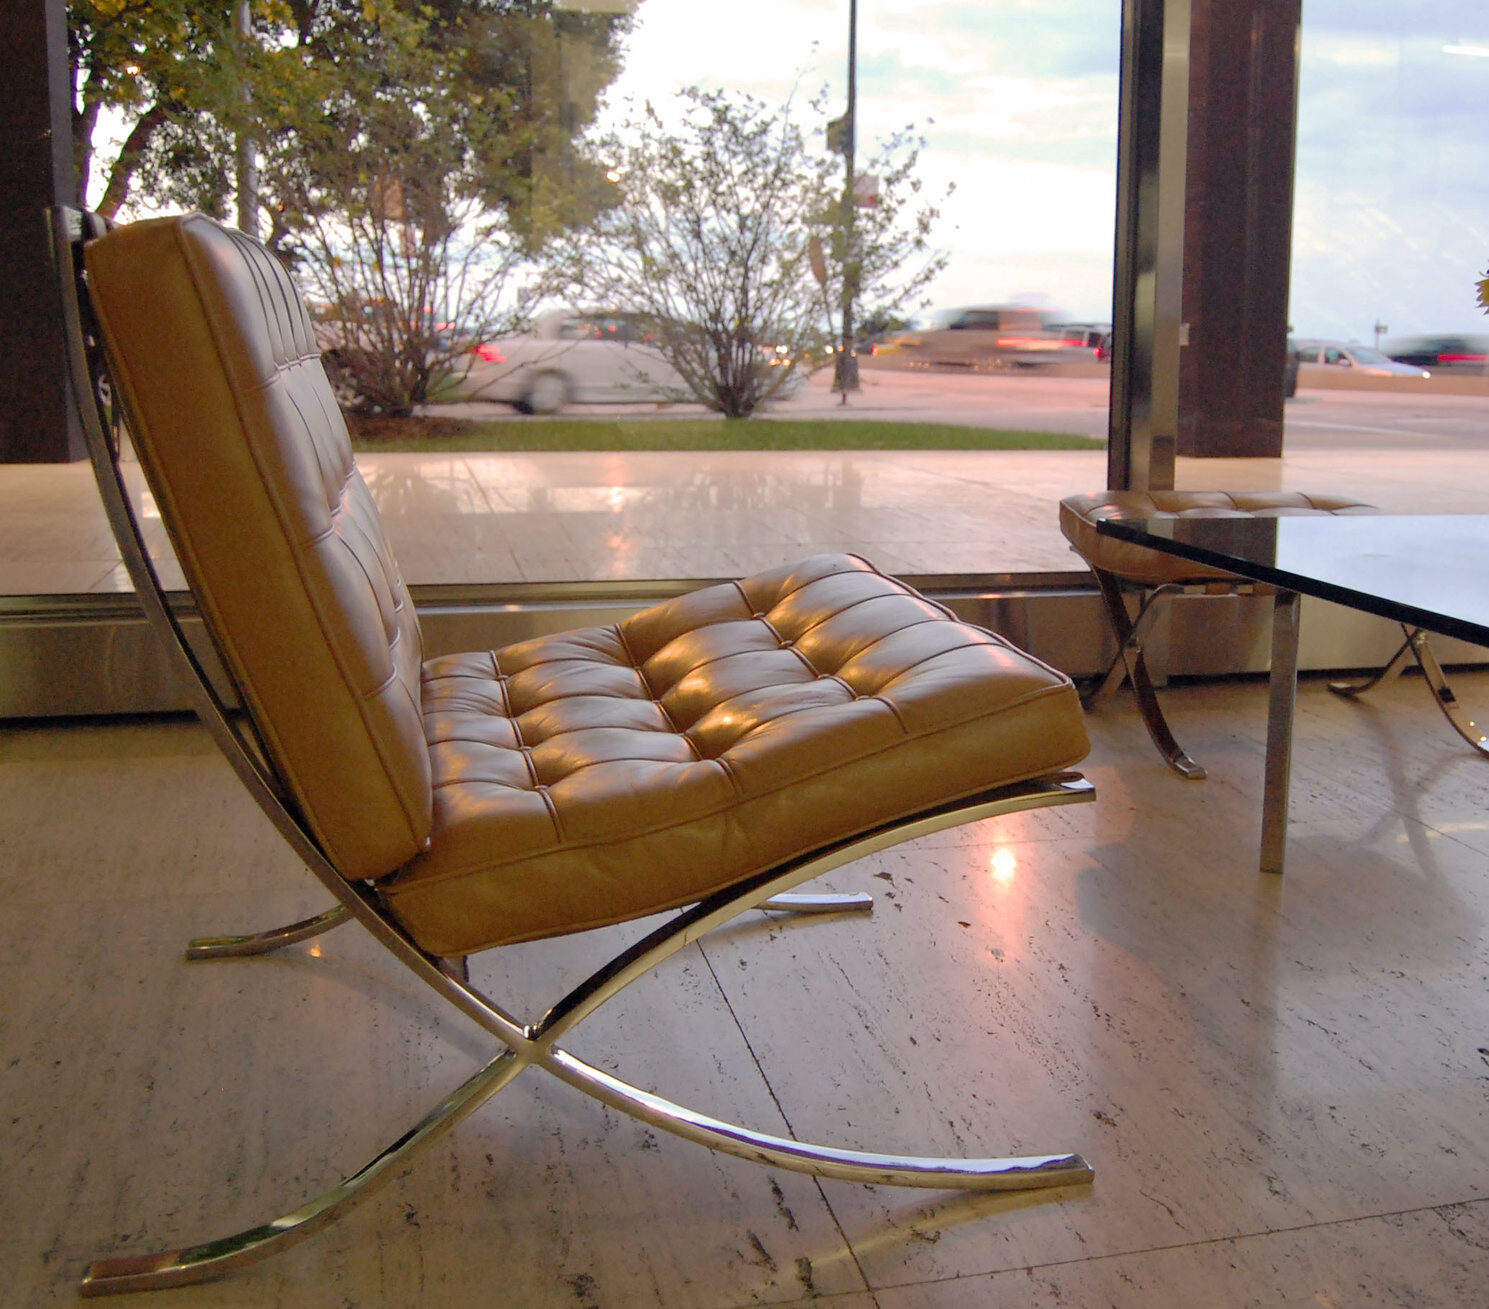 A Brief History of Modernist Furniture